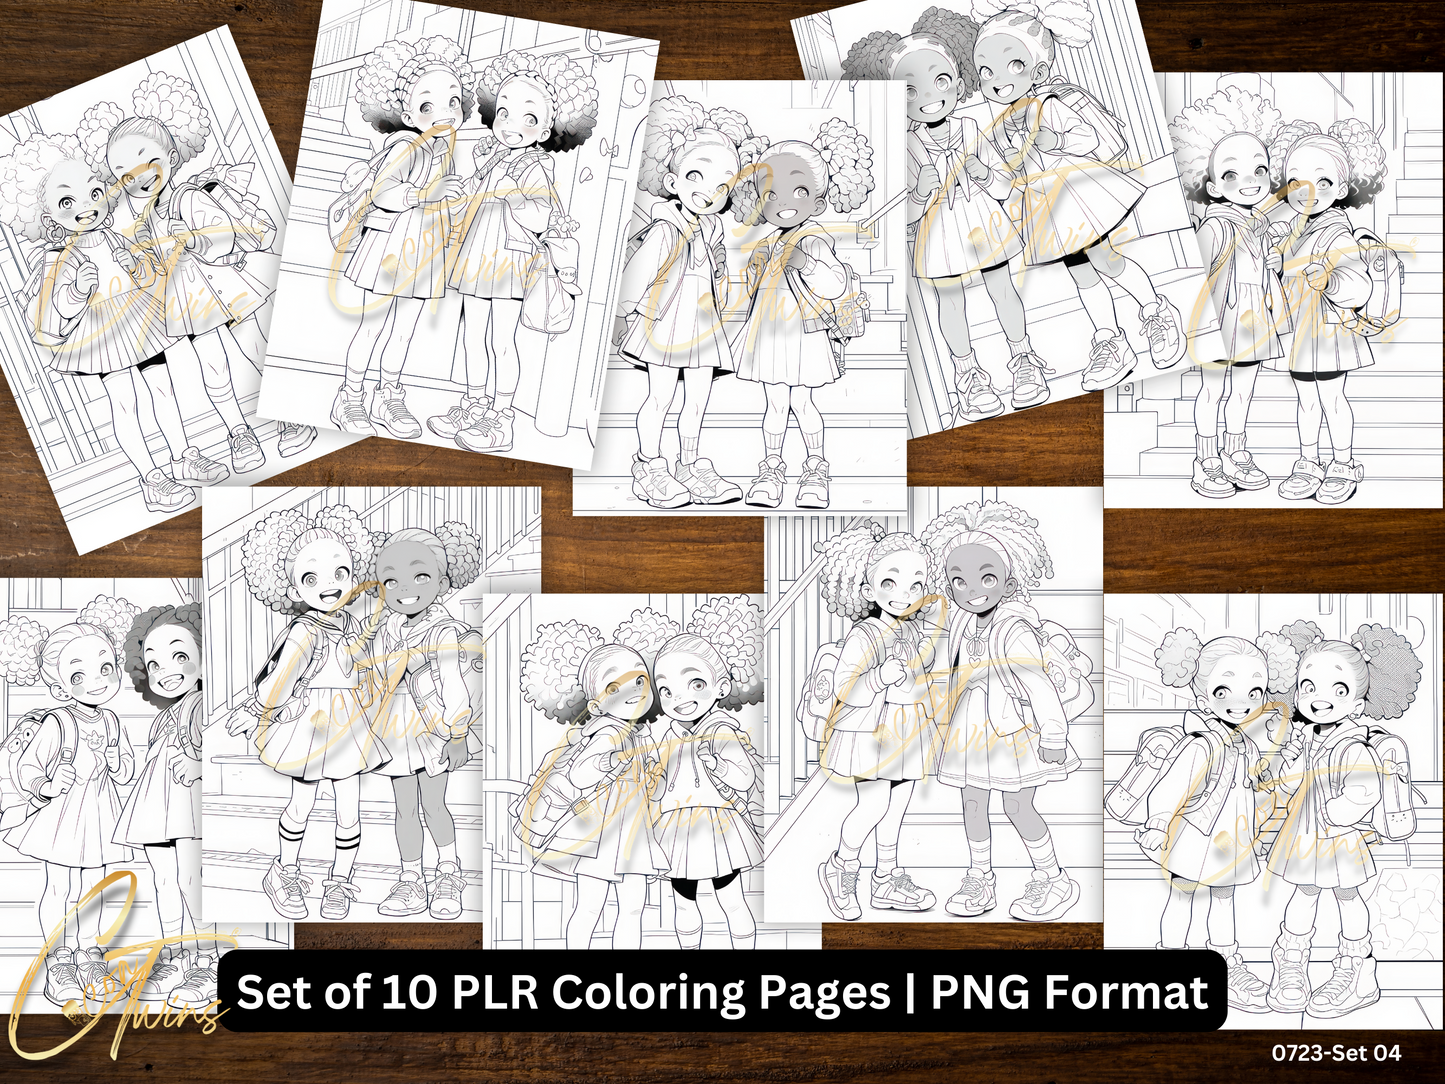 Limited Edition | PLR Coloring Pages | Set 04 (0723)